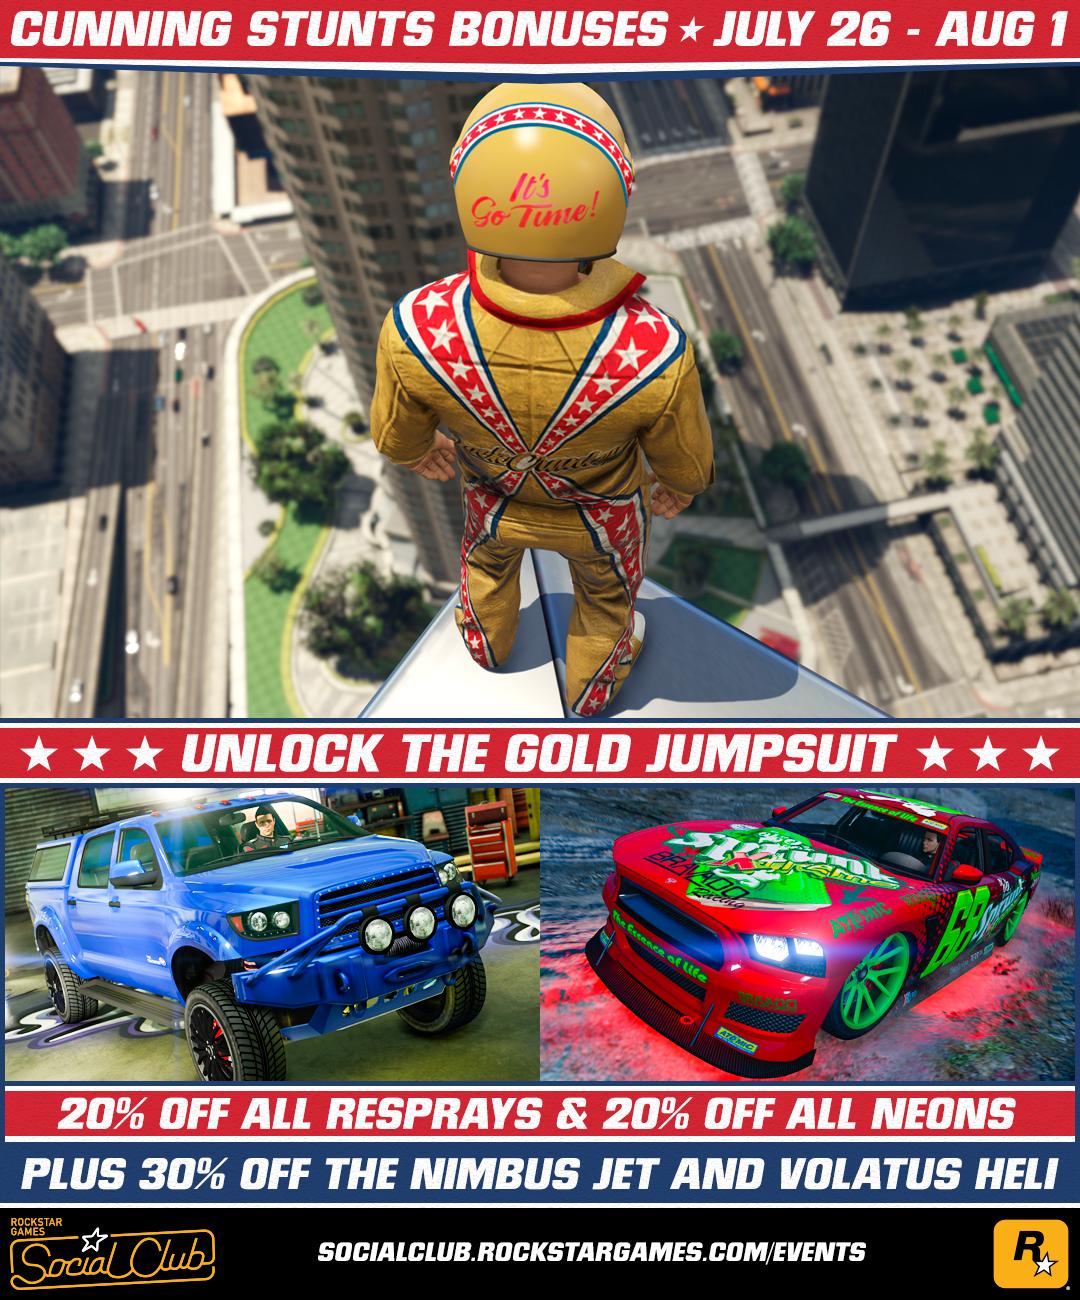 GTA Online stunt races: How to find, 2x bonus, and more